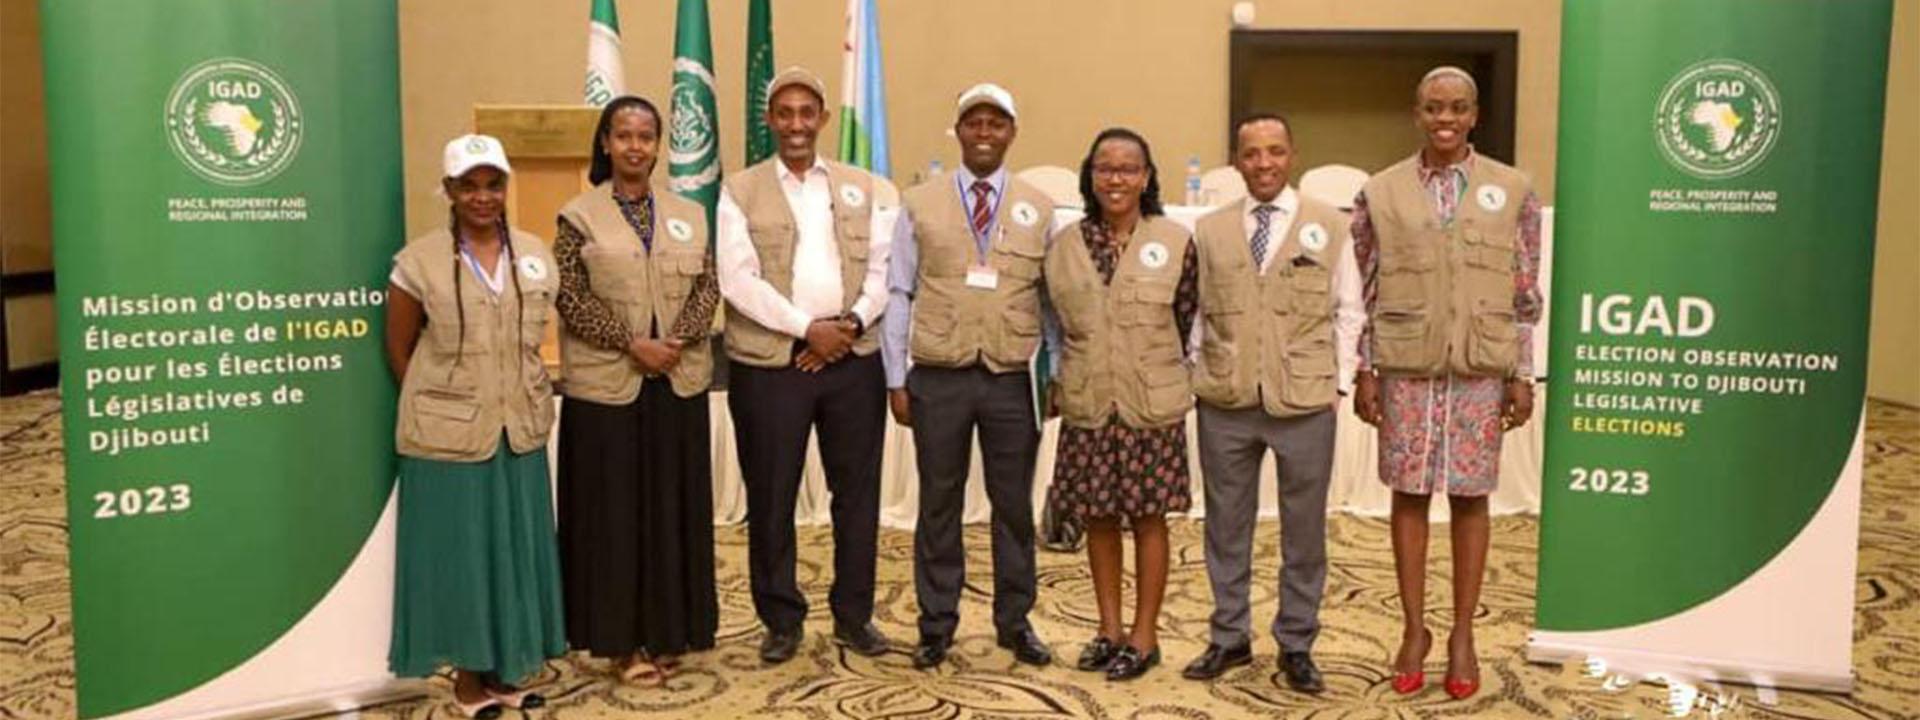 Preliminary Statement of the IGAD Election Observation Mission to the Legislative Election of Djibouti